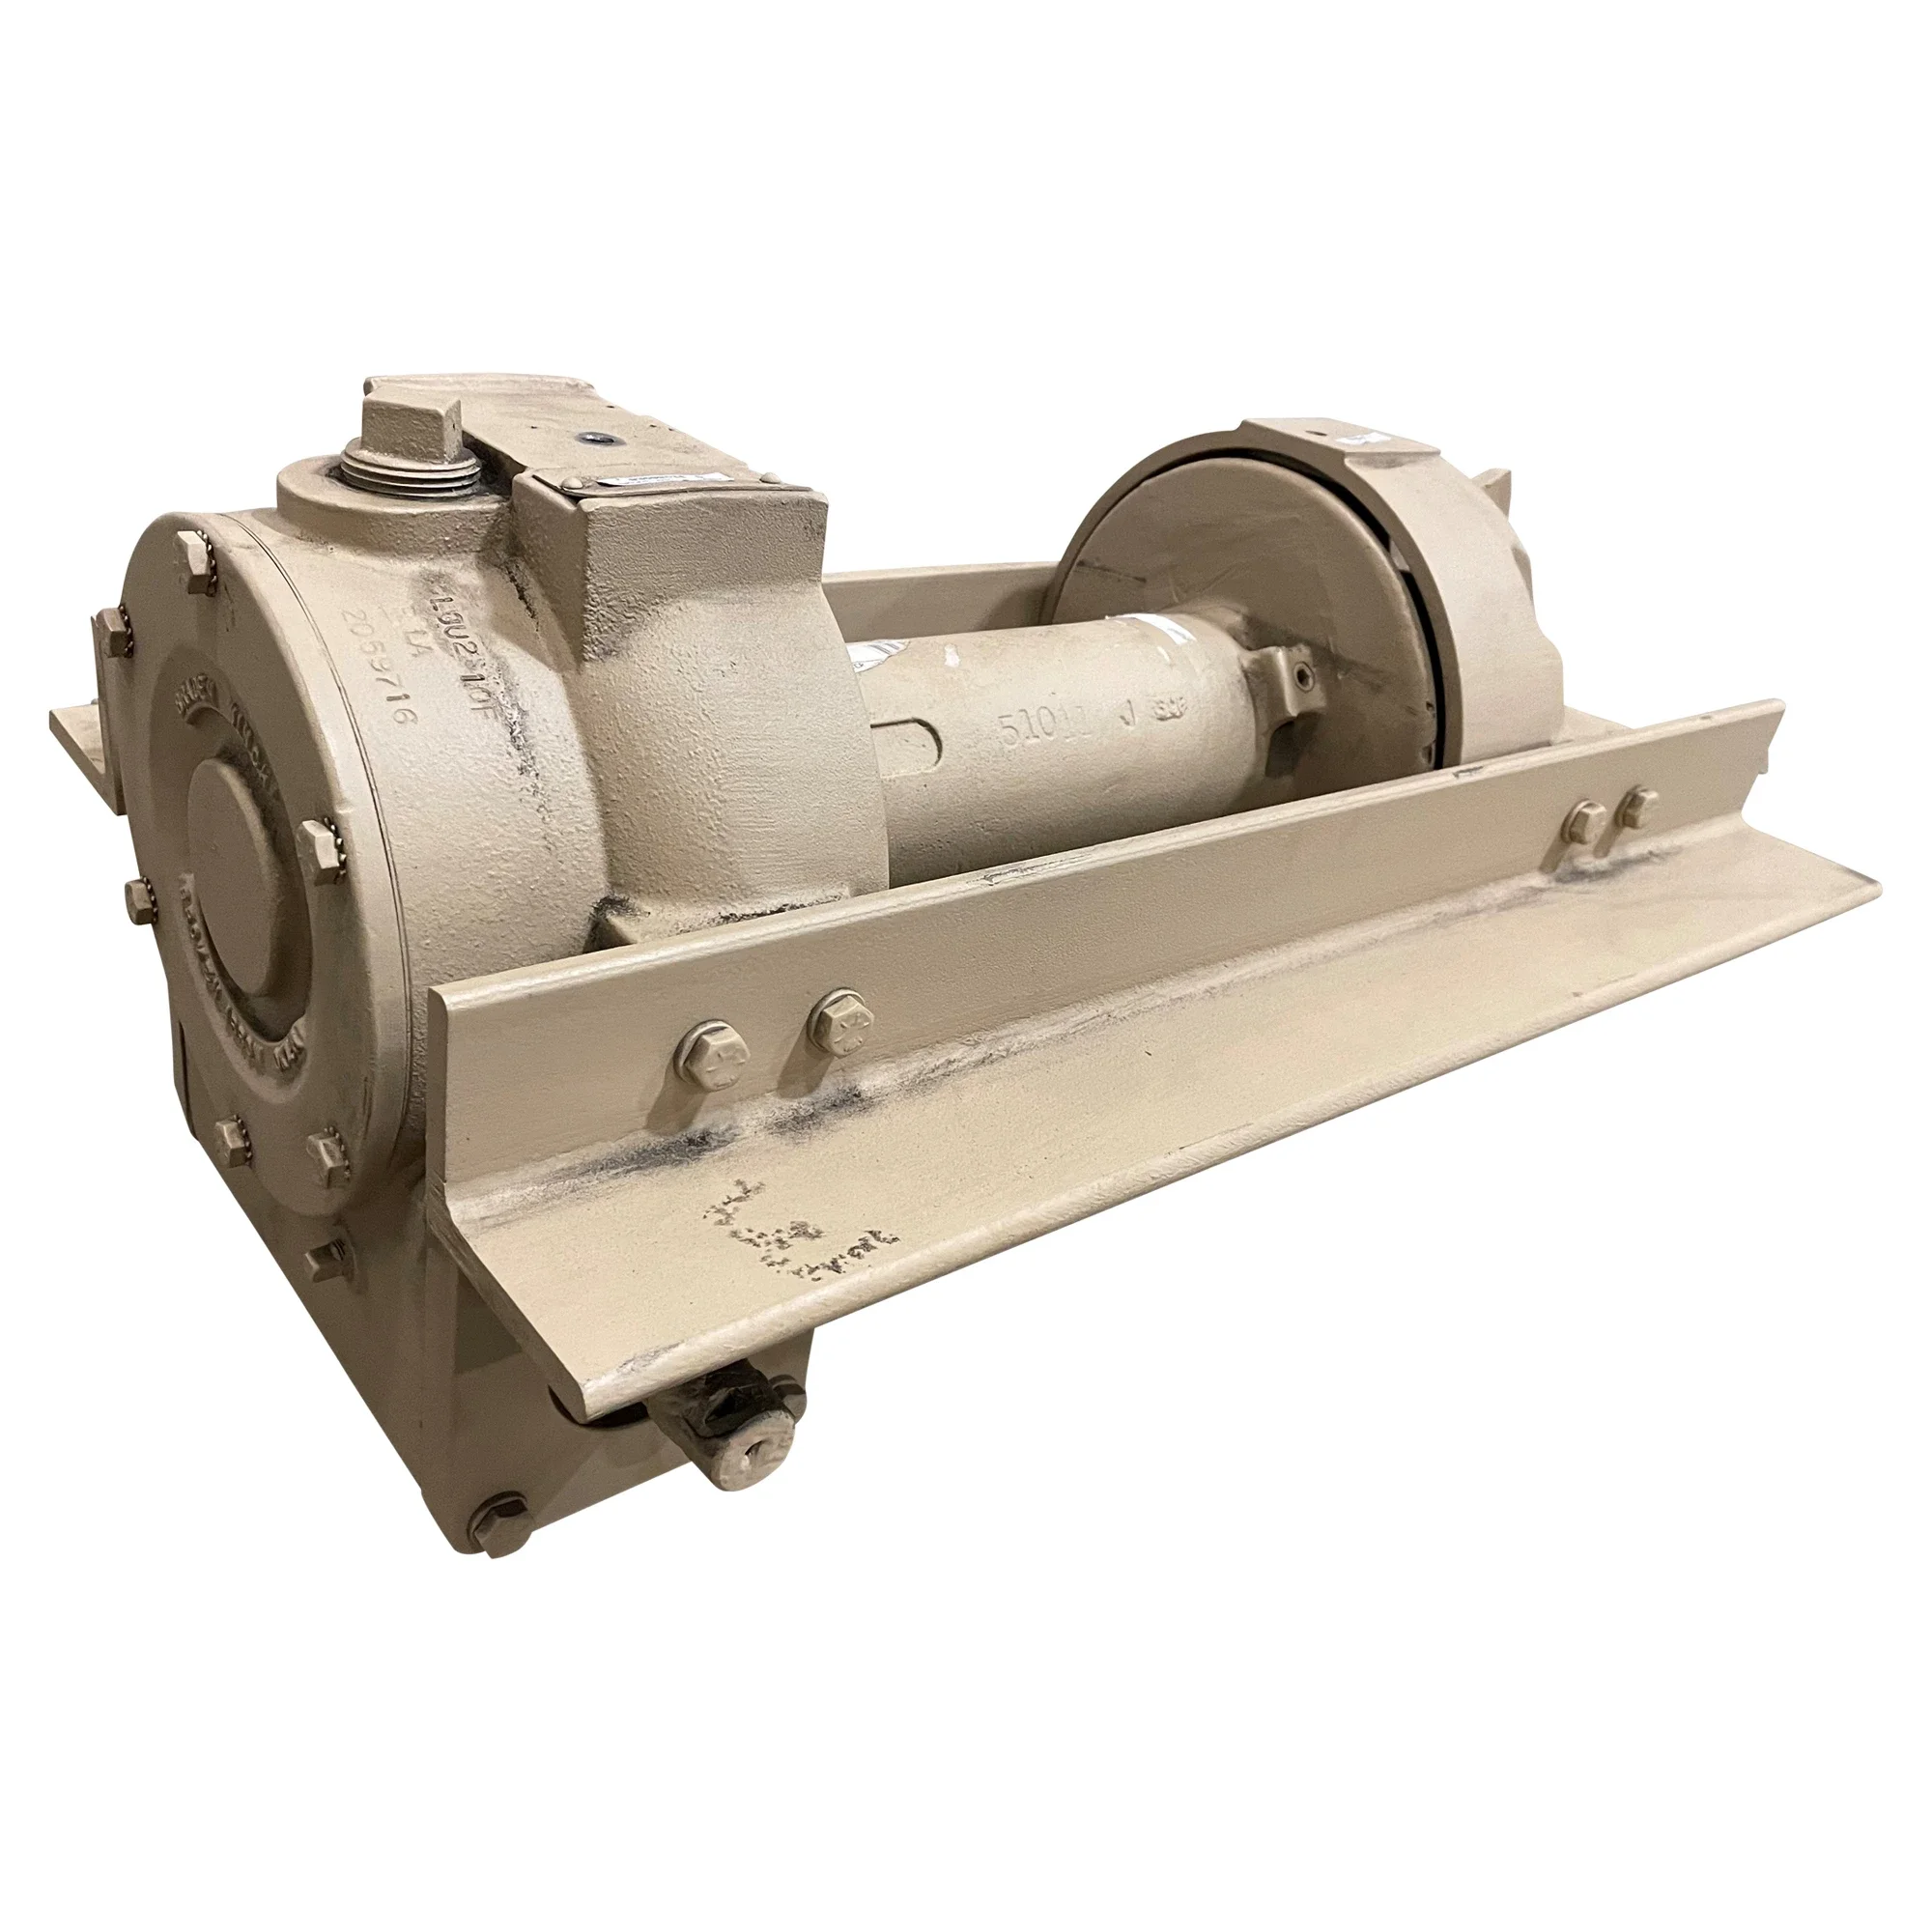 Wastebuilt® Replacement for Leach Winch Assembly